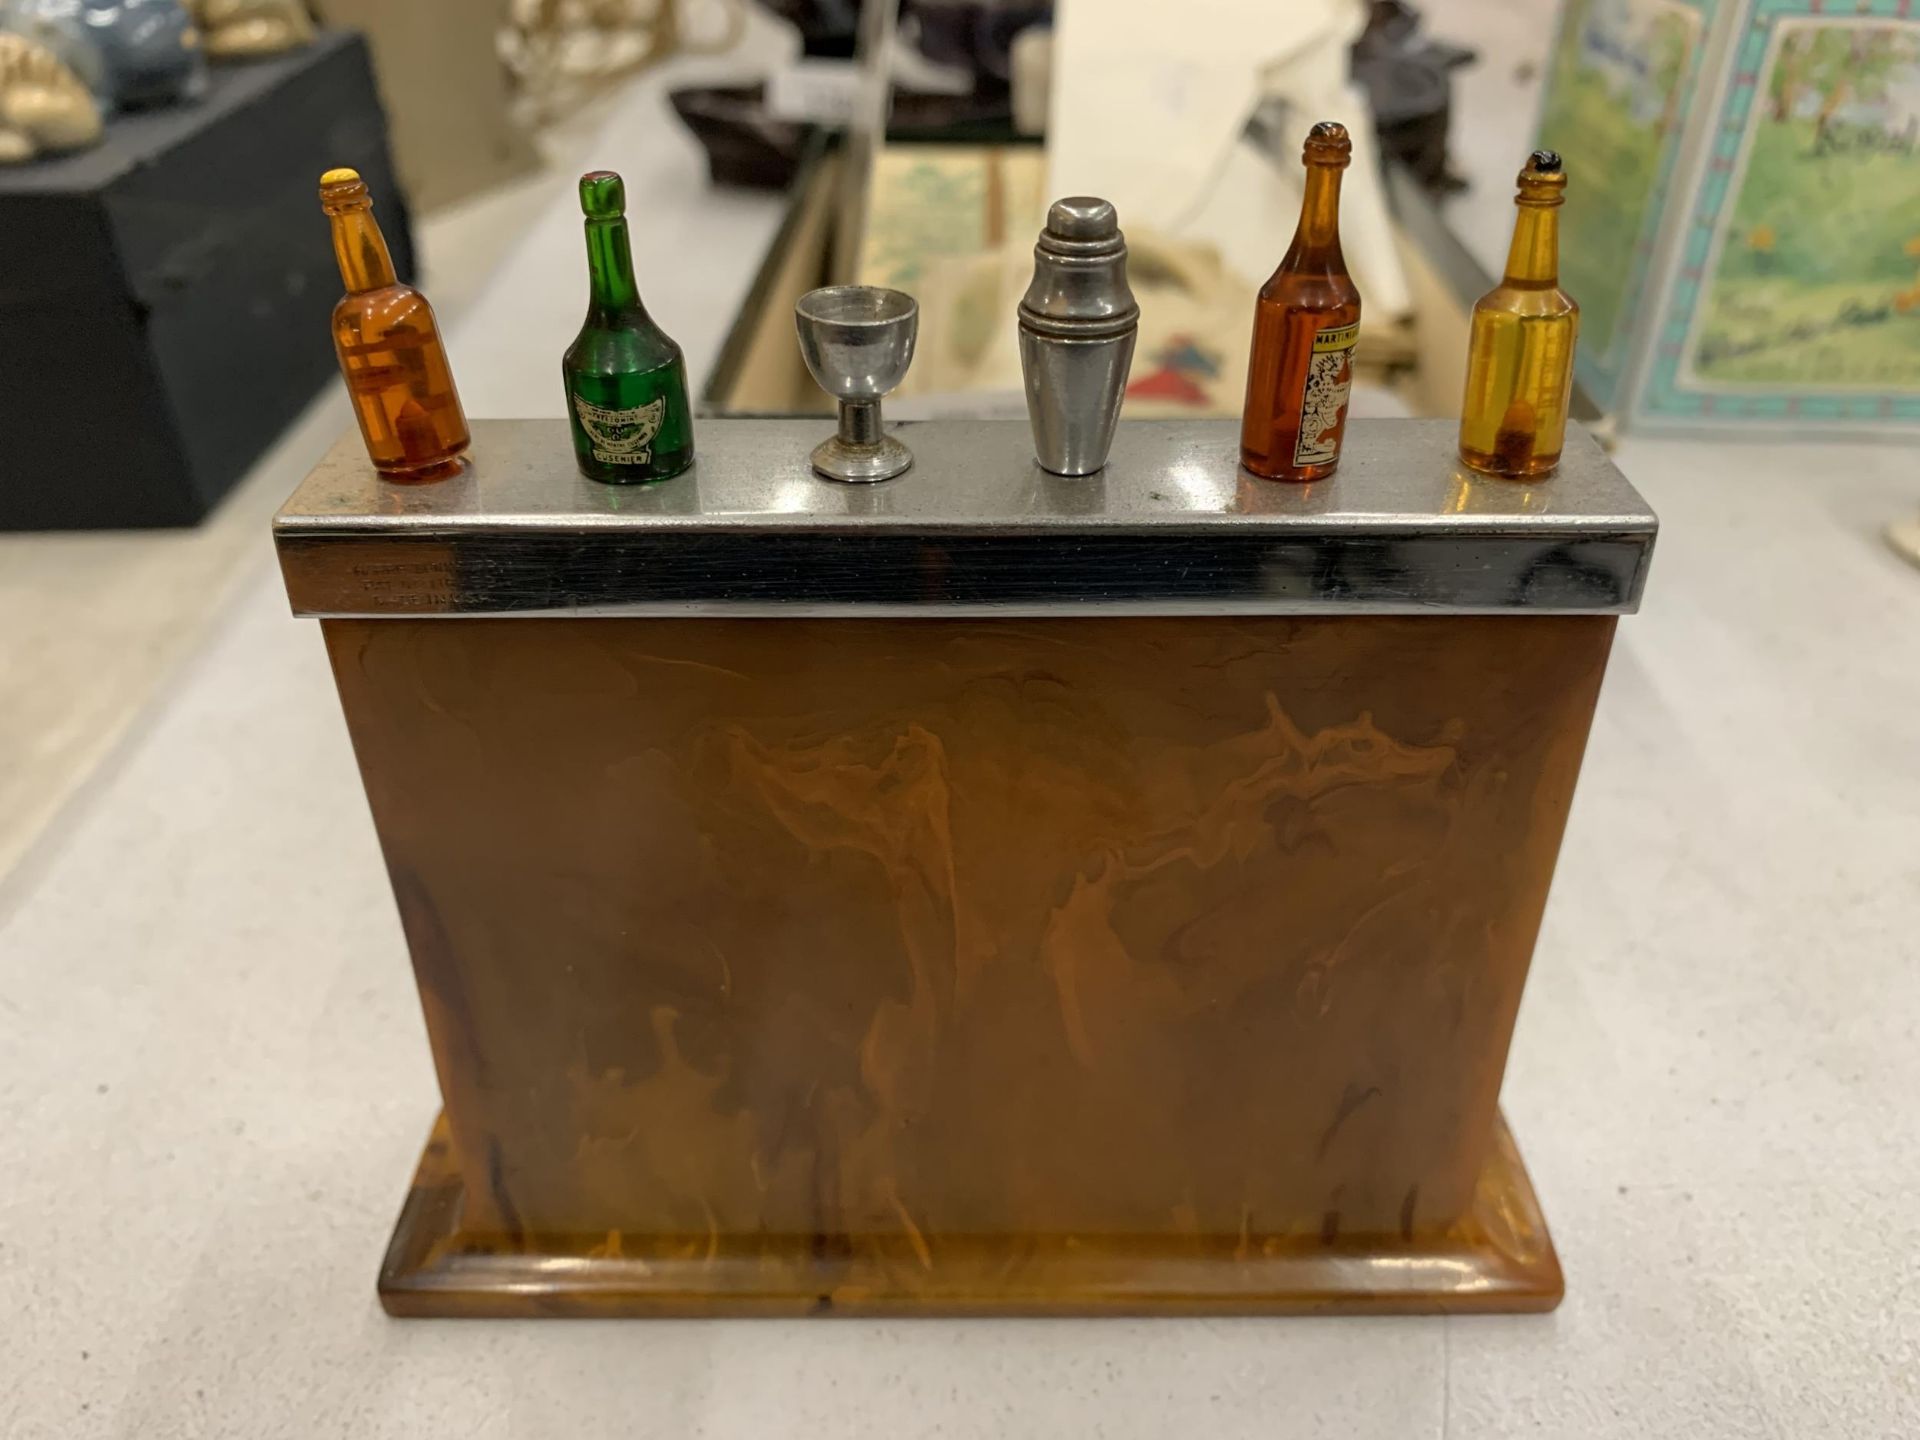 A QUIRKY BAKELITE COCKTAI BAR WITH BOTTLES AND A COCKTAIL SHAKER COCKTAIL STICKS, HEIGHT 12CM, WIDTH